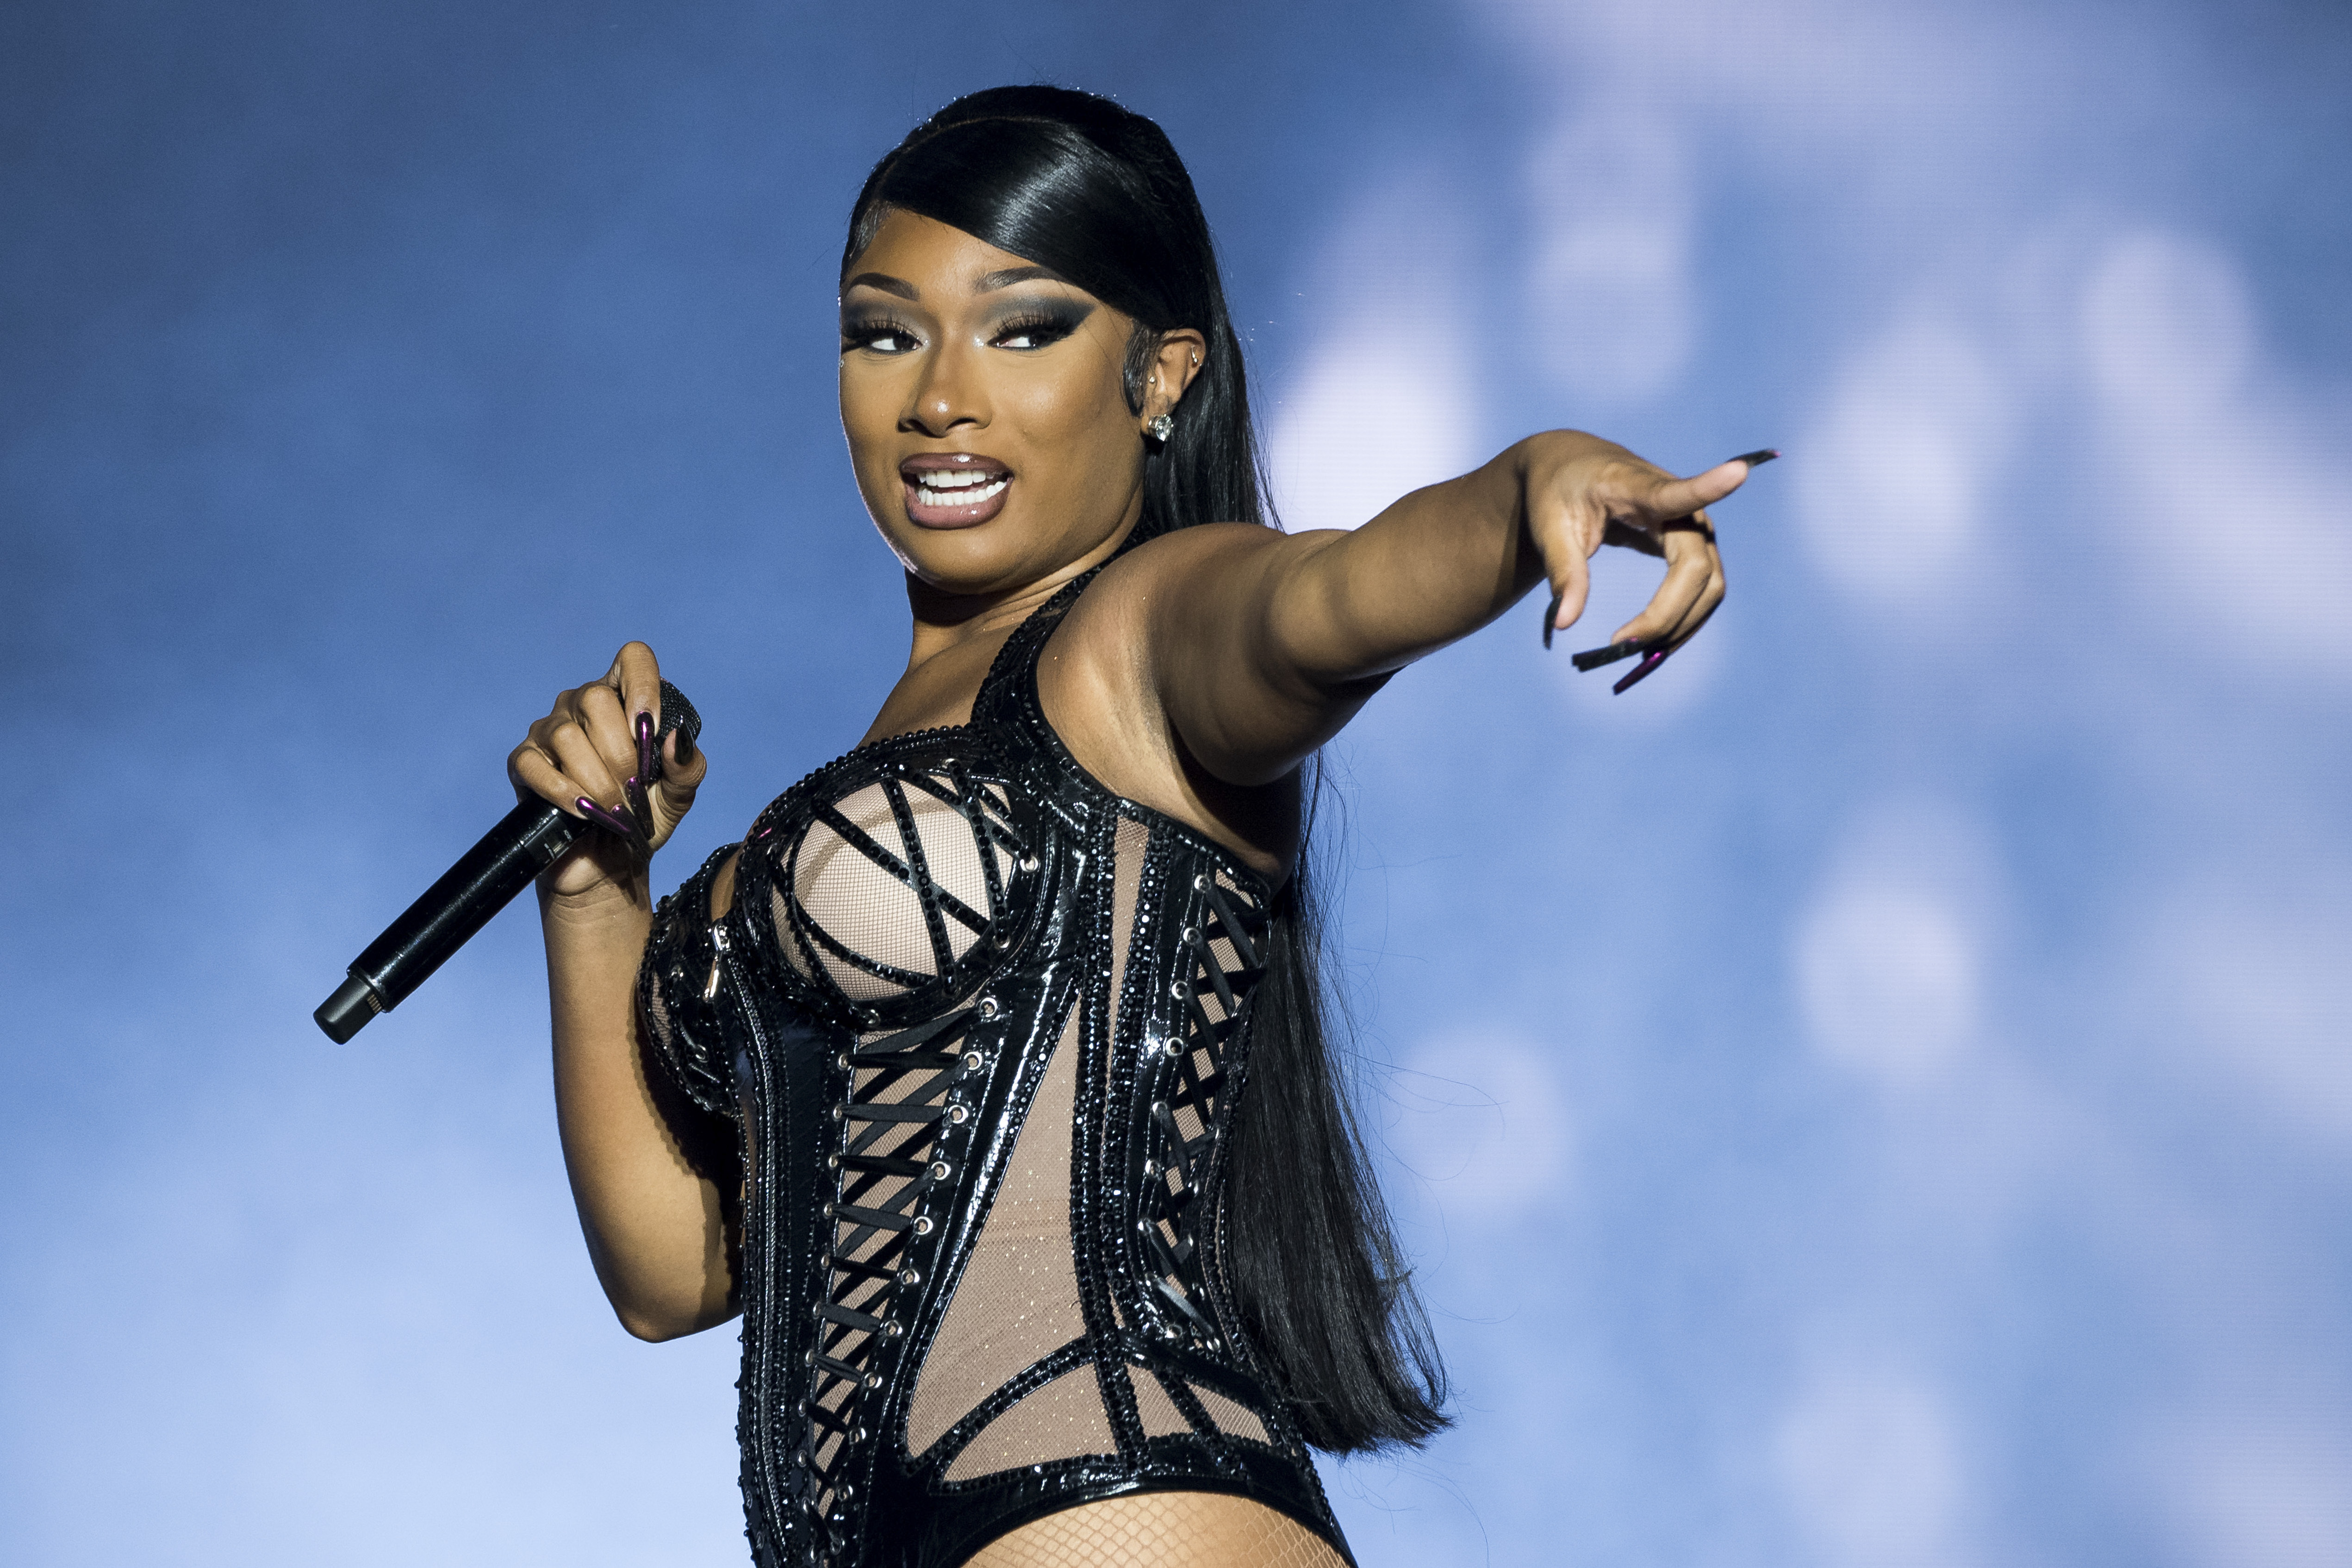 Megan Thee Stallion announces ‘Hot Girl Summer Tour' stop in North
Texas